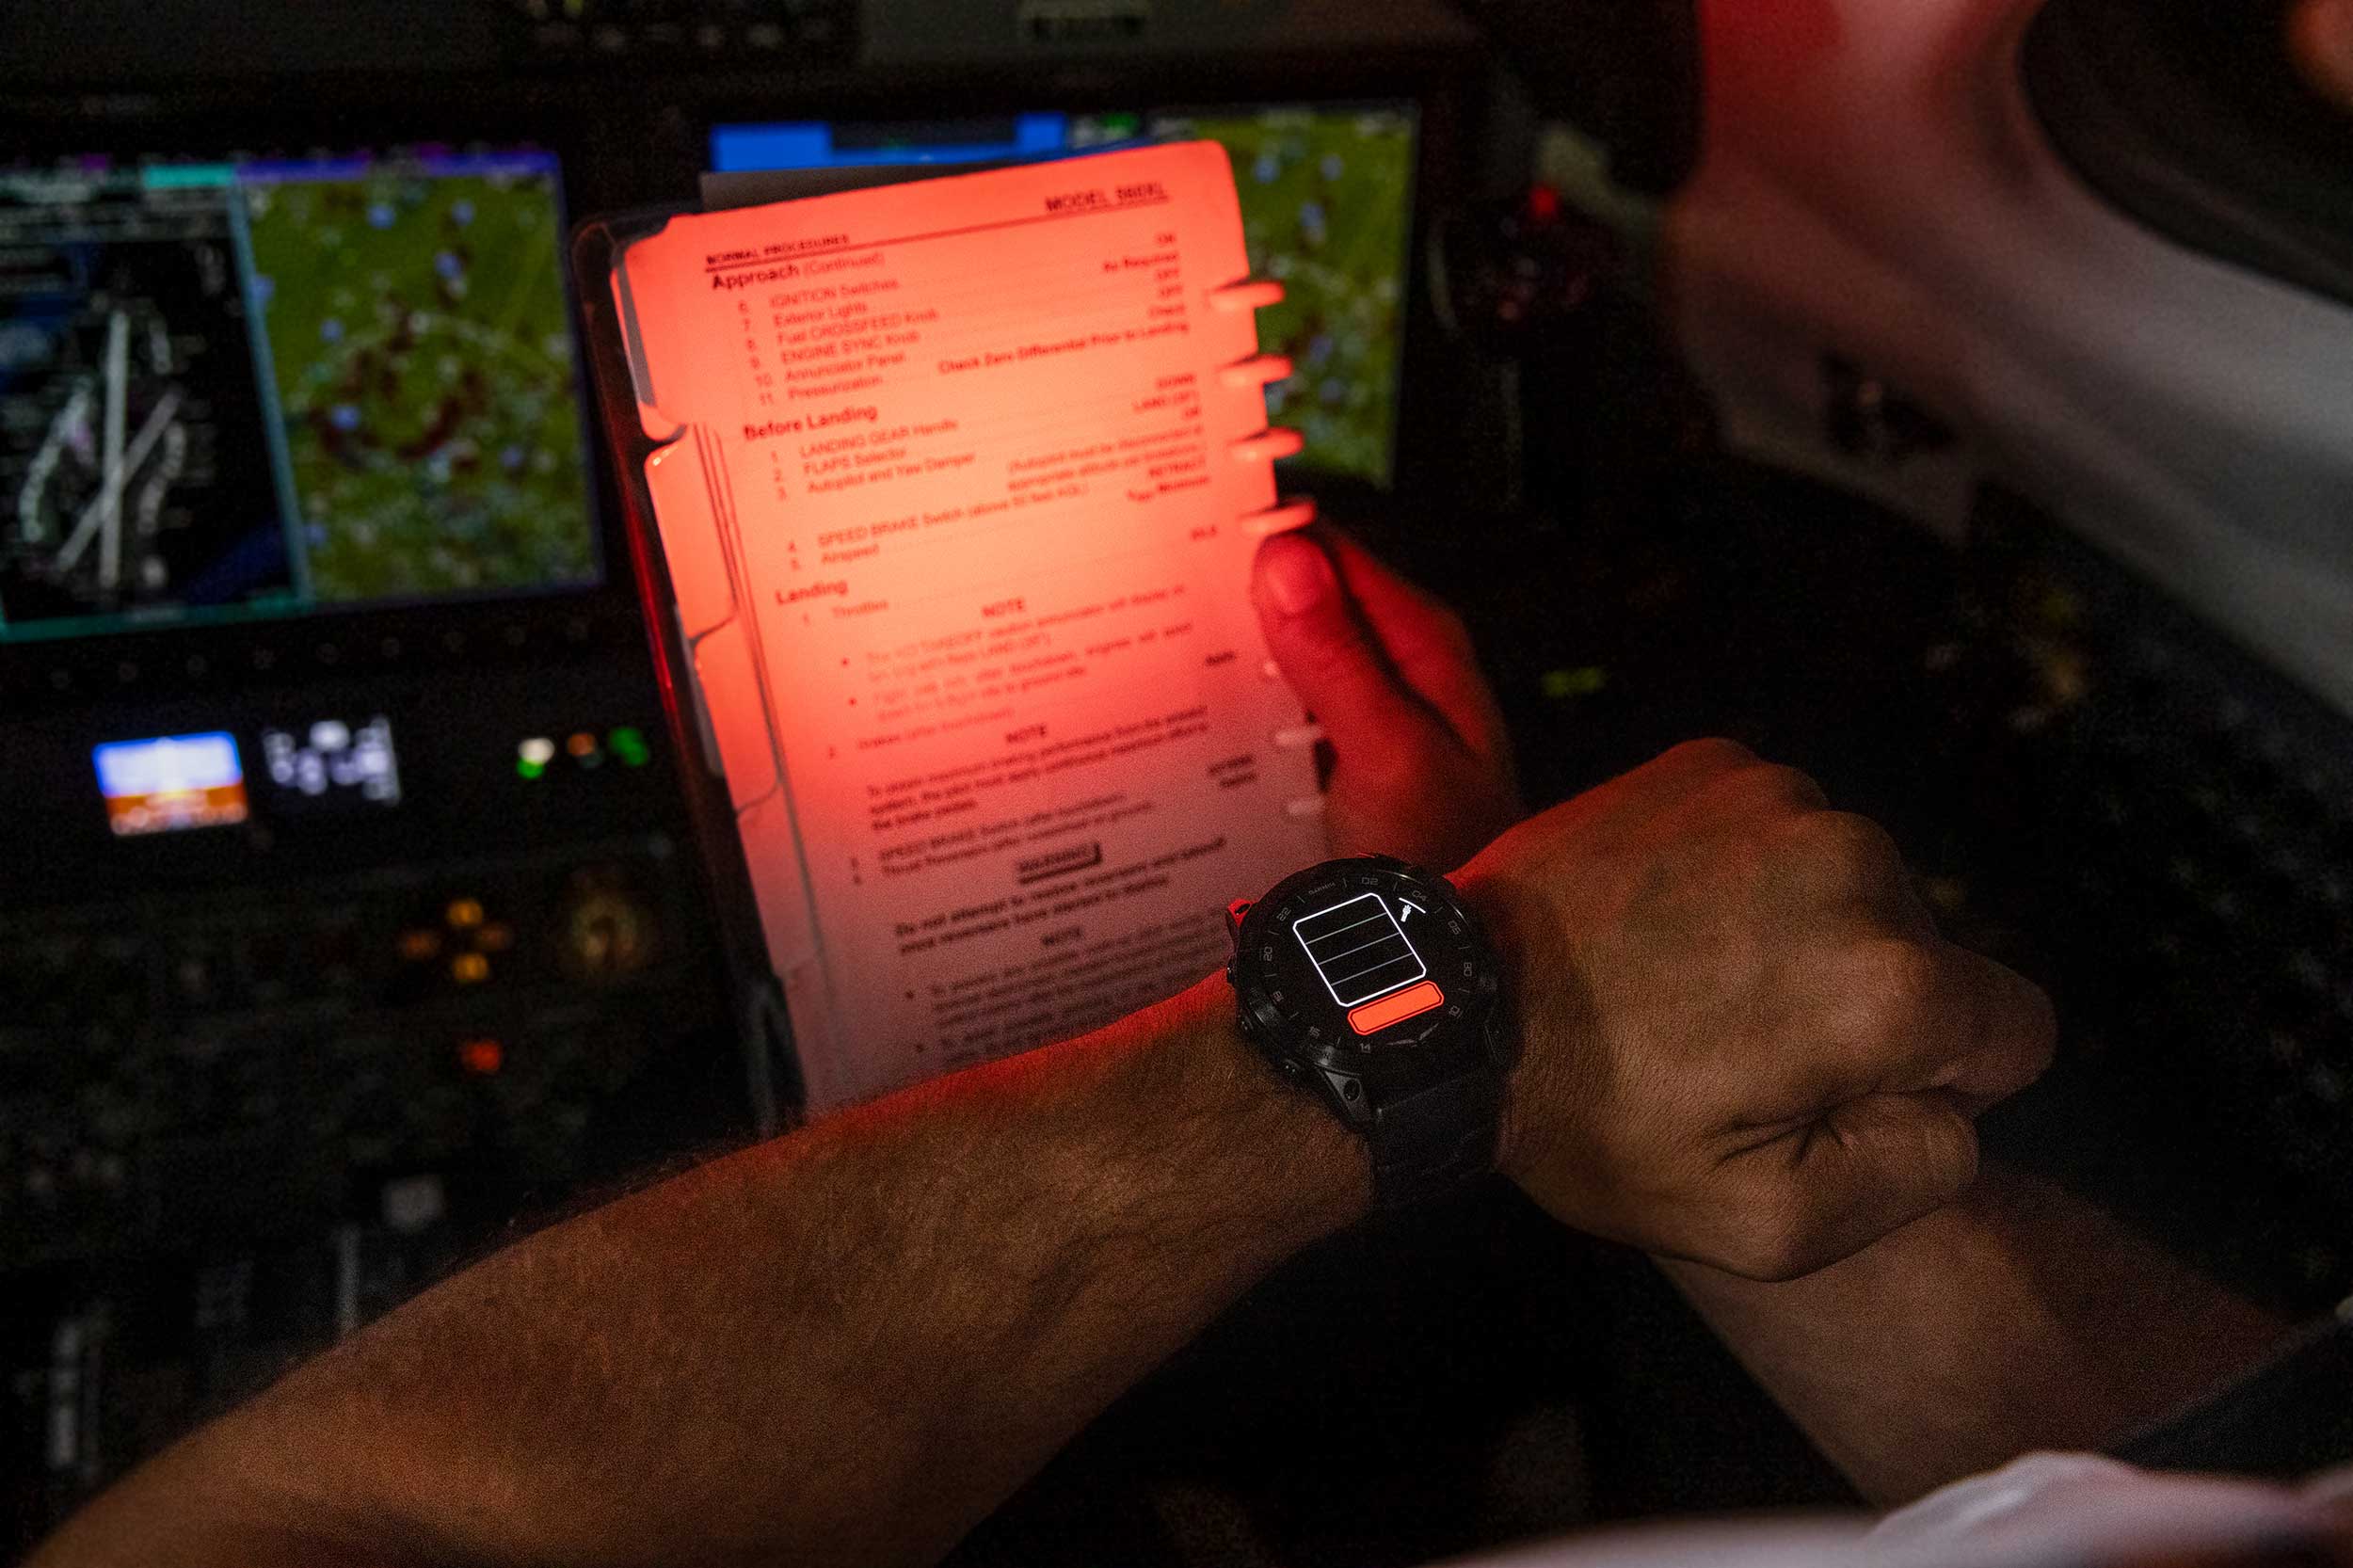 Garmin watch in red shift mode to preserve night vision